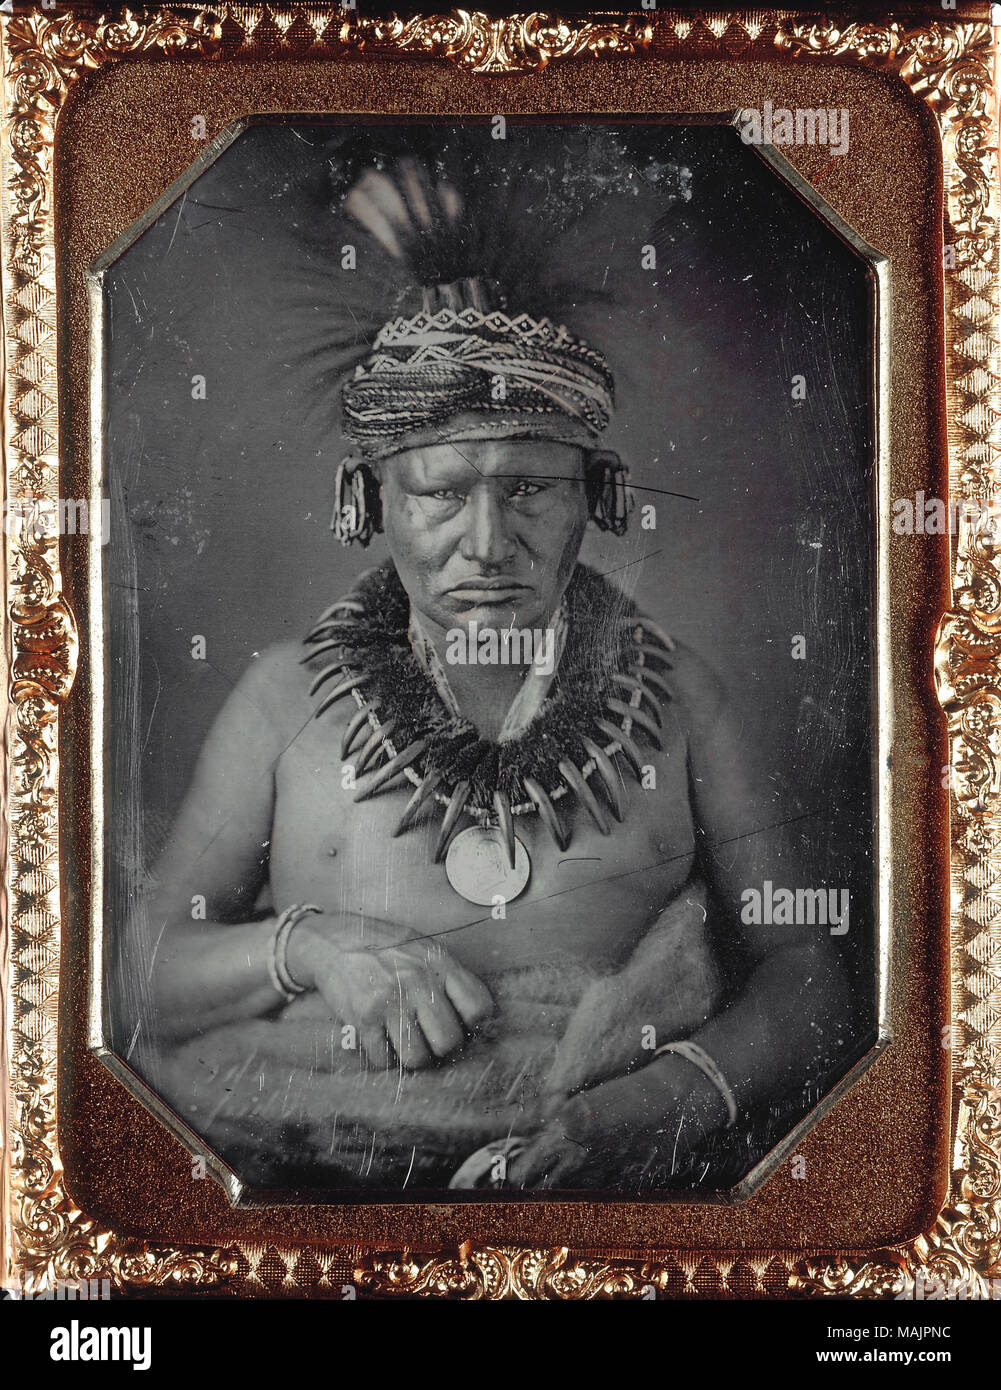 Portrait of Children's Chief, [Op-po-noos or Appanoose] Sac and Fox. Daguerreotype is in its original case. The words 'Easterly' and 'Artist' are engraved into the corners of the daguerreotype's frame. This daguerreotype has faint writing that is reversed, indicating that it is a duplicate plate. The writing is too faint to read. Title: Children's Chief, [Op-po-noos or Appanoose] Sac and Fox.  . 1847. Thomas M. Easterly Stock Photo